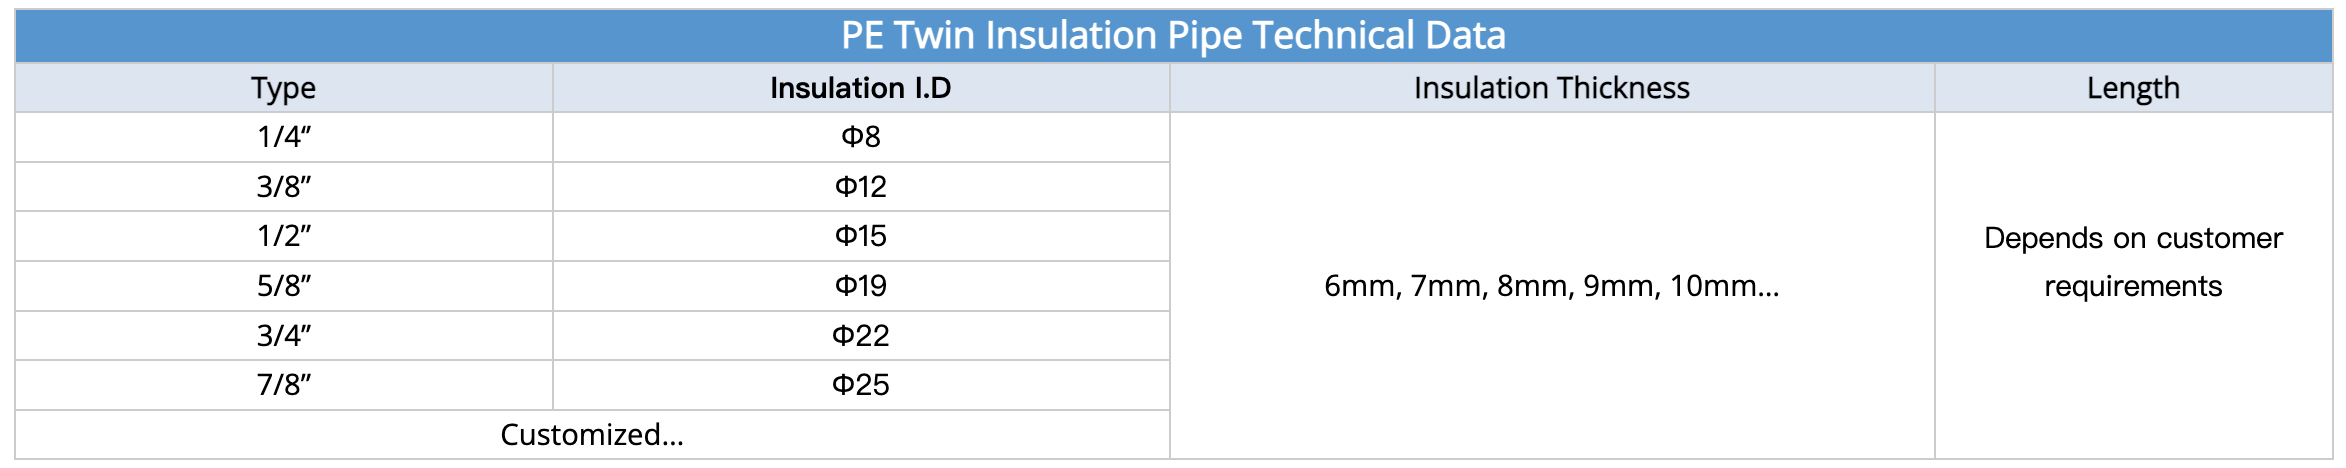 Specification of PE Insulation Pipe with Two Layers Only